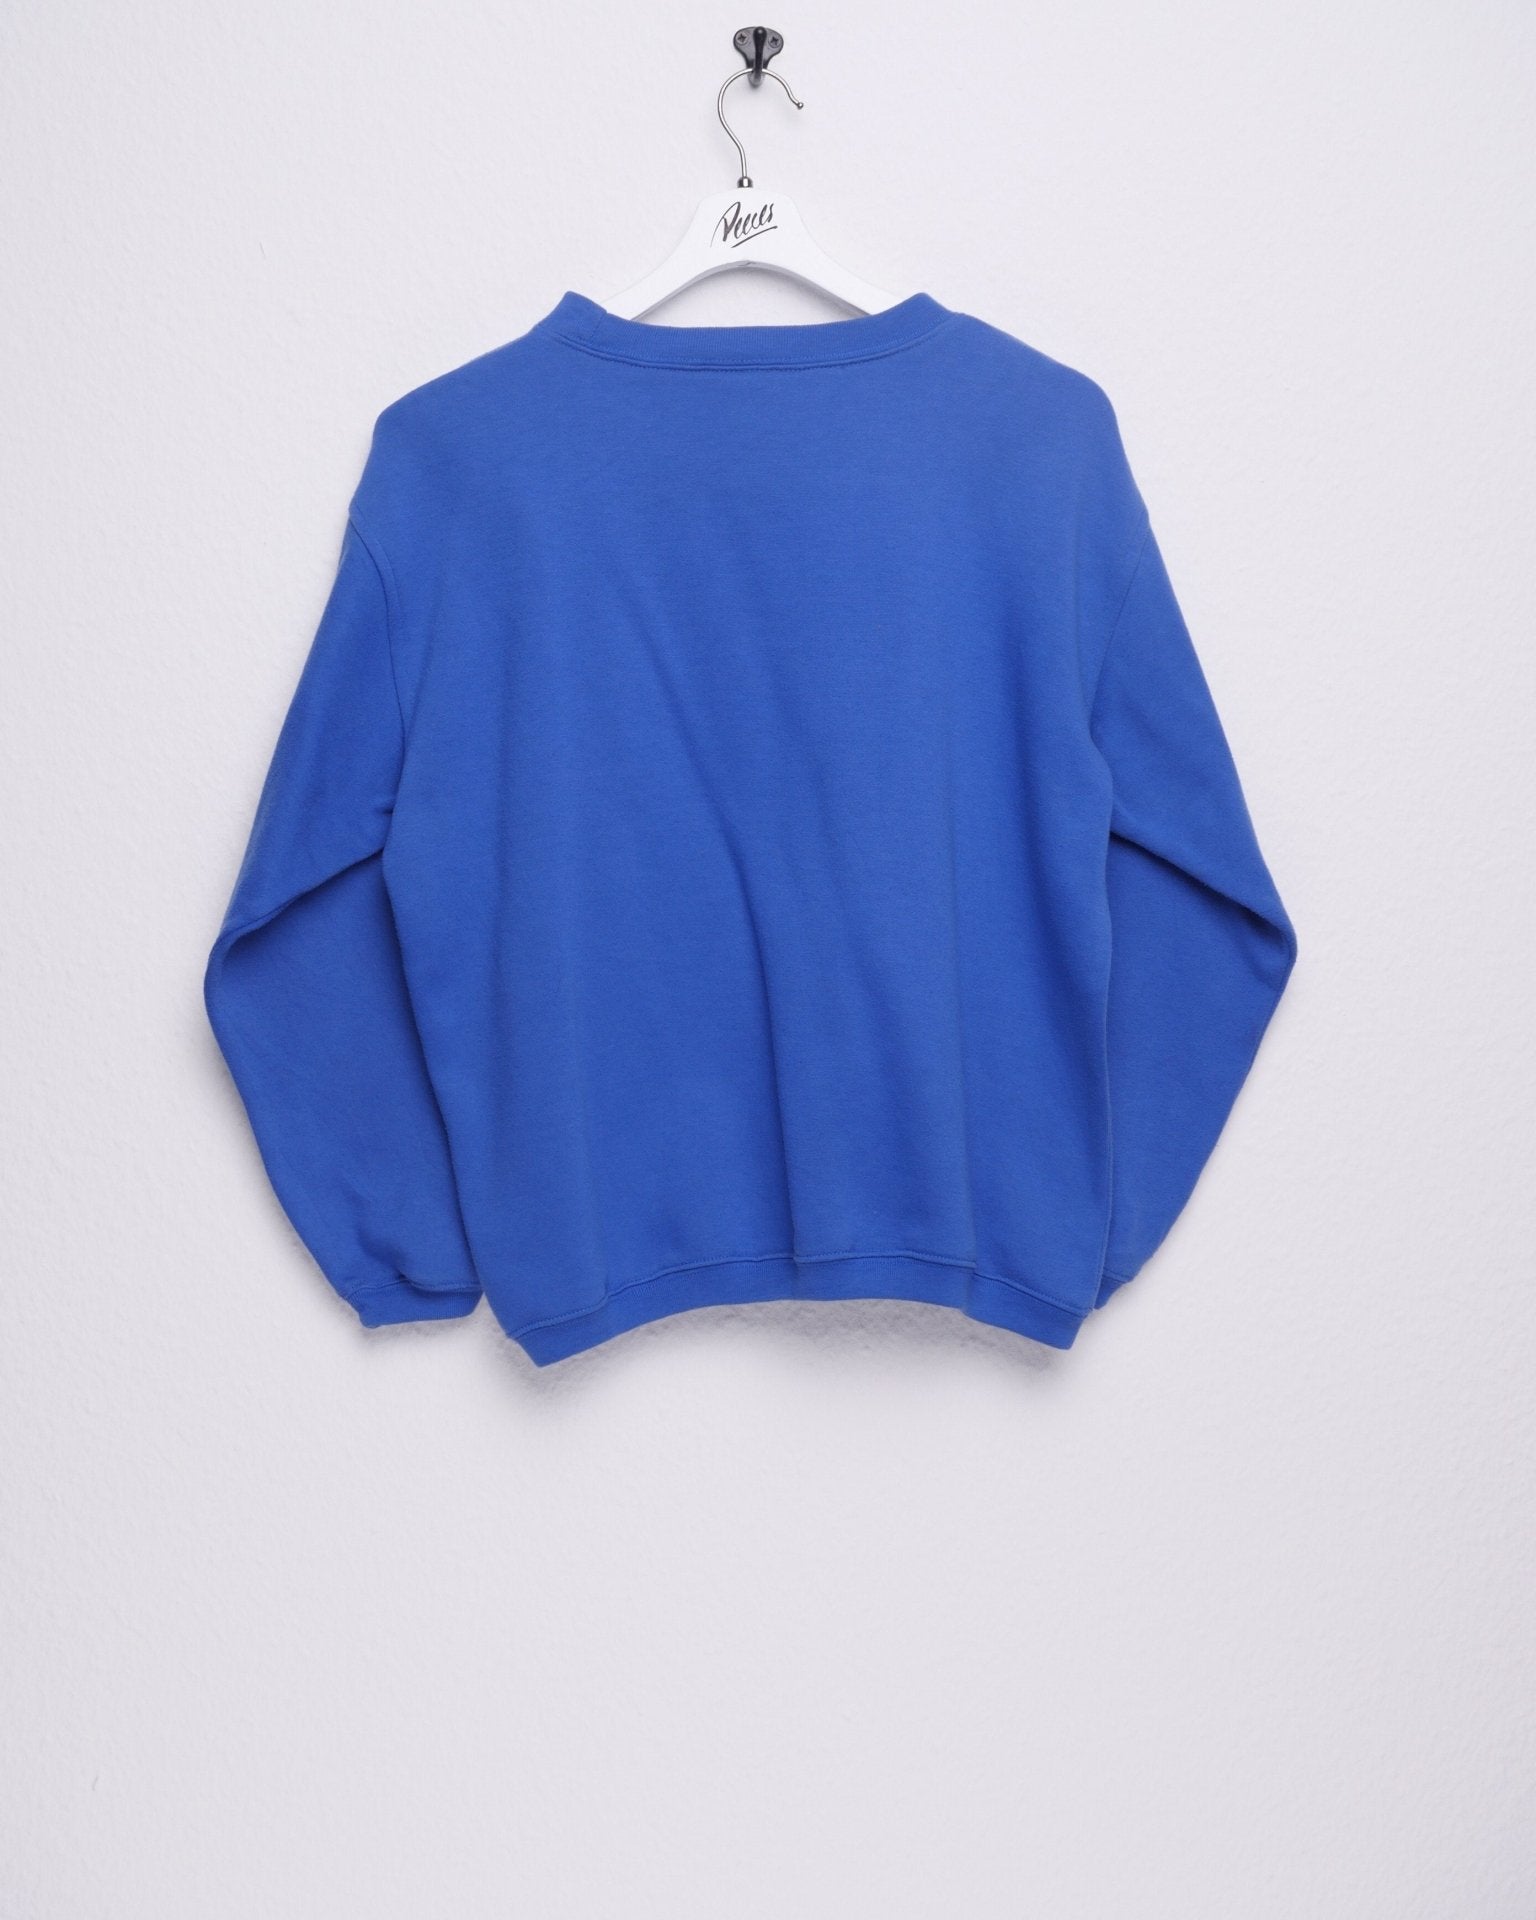 'Le Studio Sport' embroidered Spellout blue Sweater - Peeces